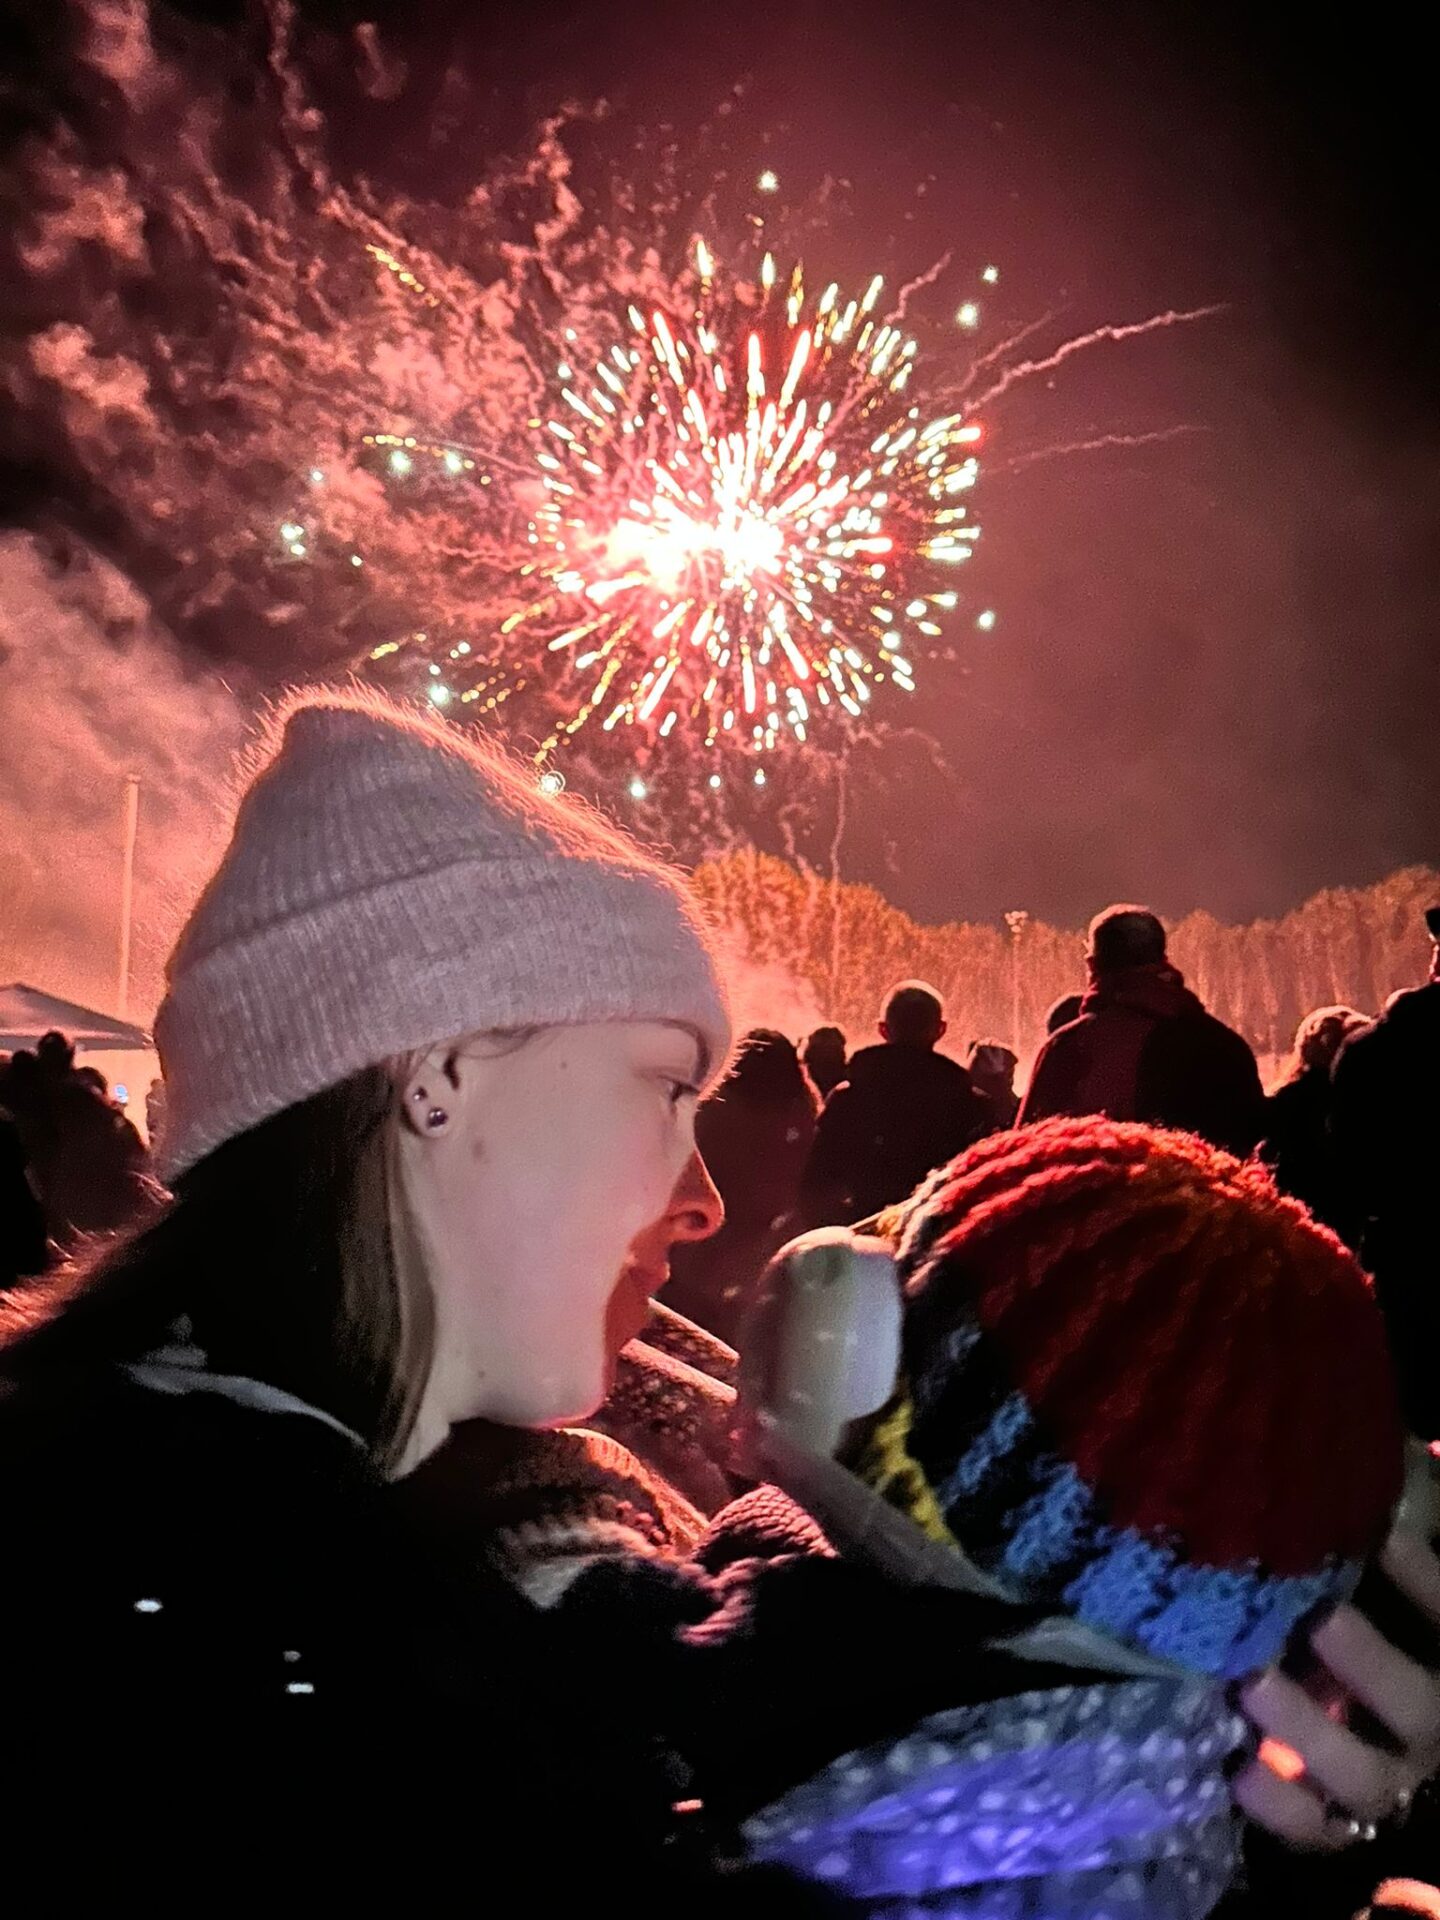 Back of a baby's head as he gazes up at the sky at fireworks. Woman carrying baby looks into his face. 